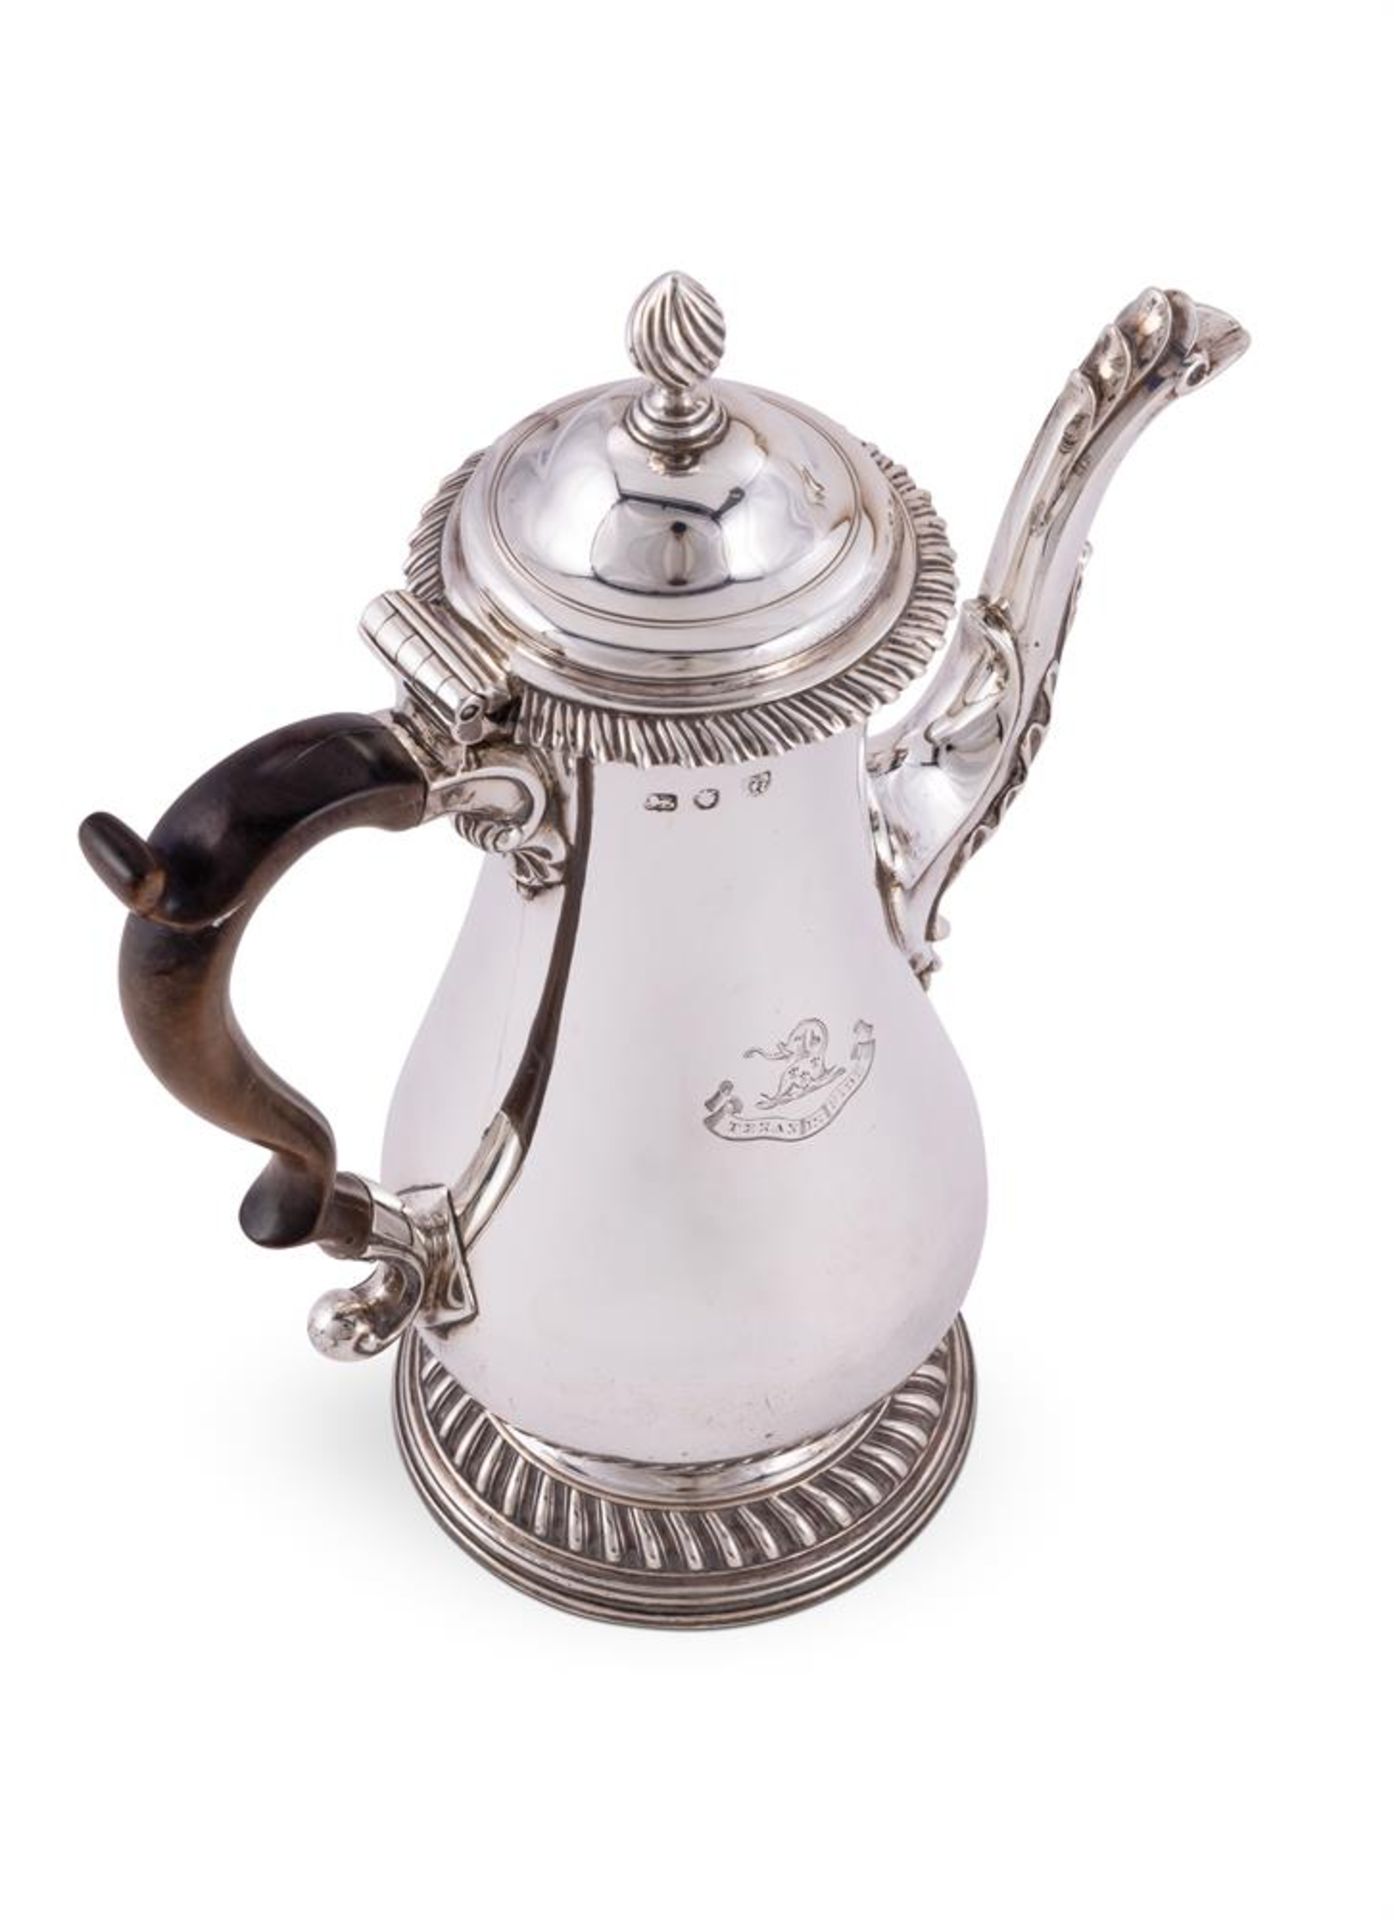 A GEORGE III SILVER BALUSTER COFFEE POT - Image 3 of 3